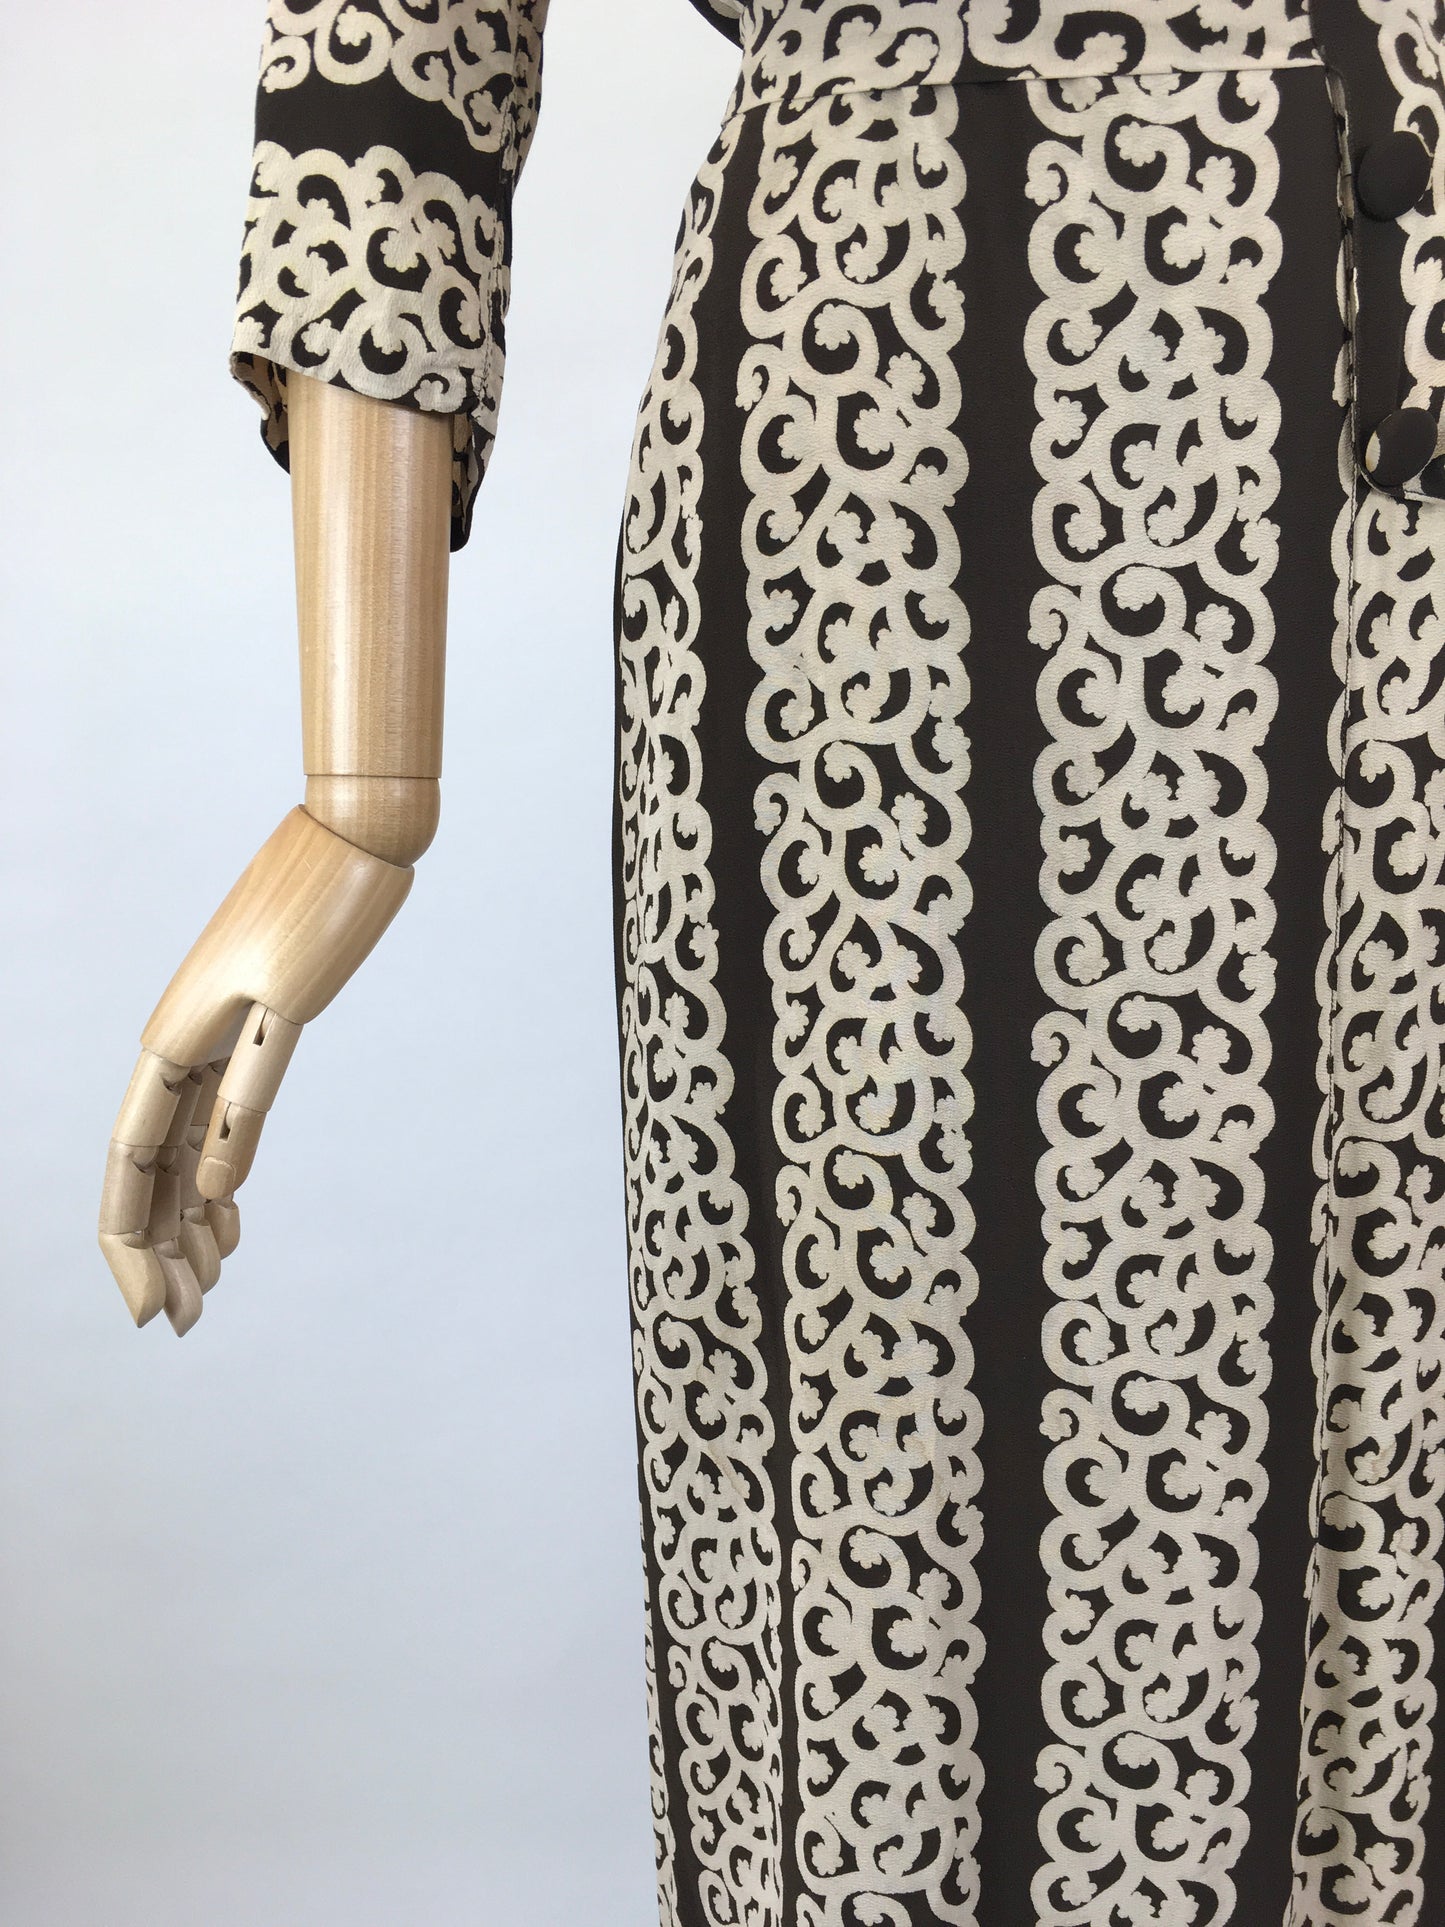 Original 1940’s Stunning Crepe Dress - In a Warm Brown and Old Cream